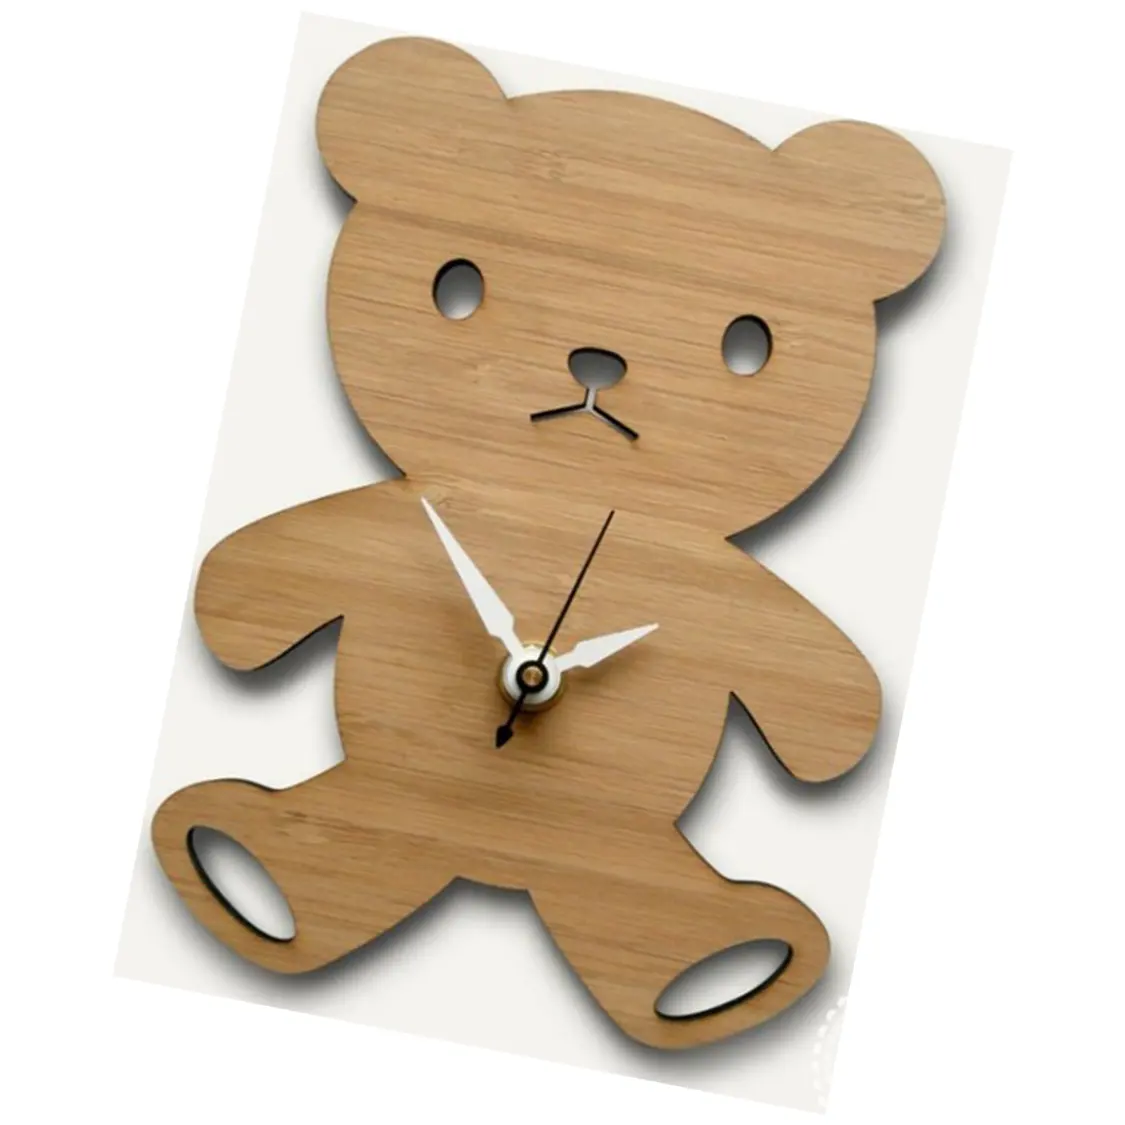 High Quality Adorable Wooden Wall Clock With Animal Shape For Home Decoration WhatsApp +84 937545579